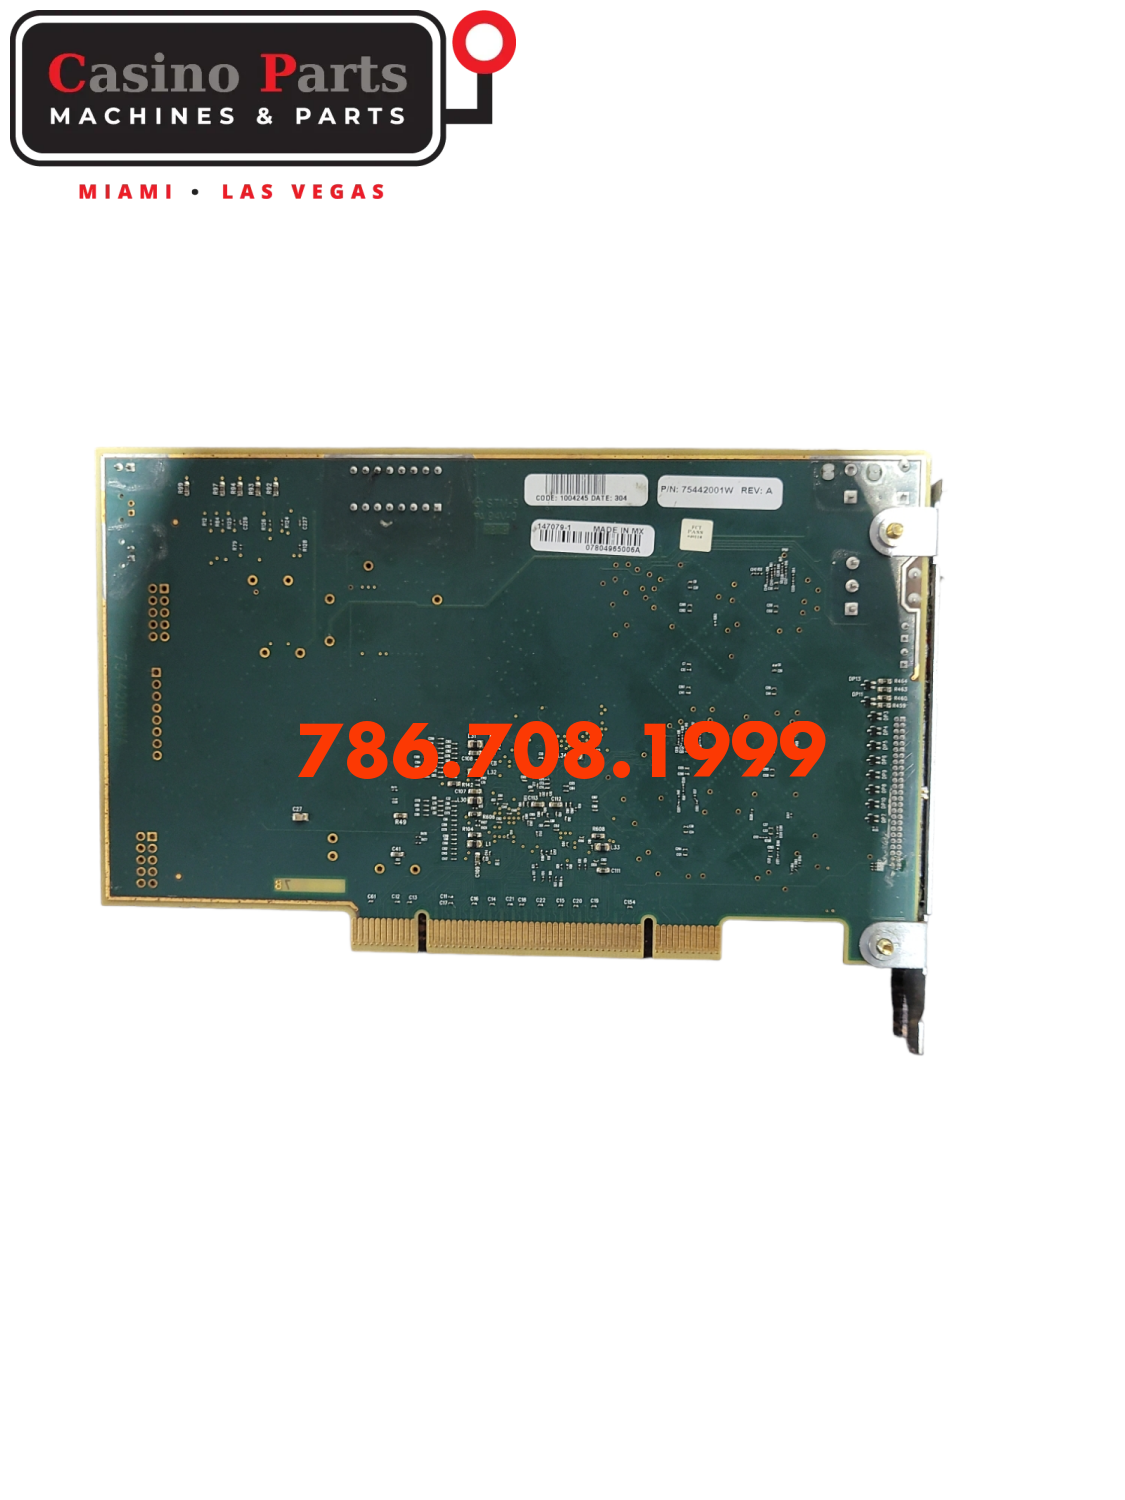 Pci Card For Igt 3.0 Brain Box